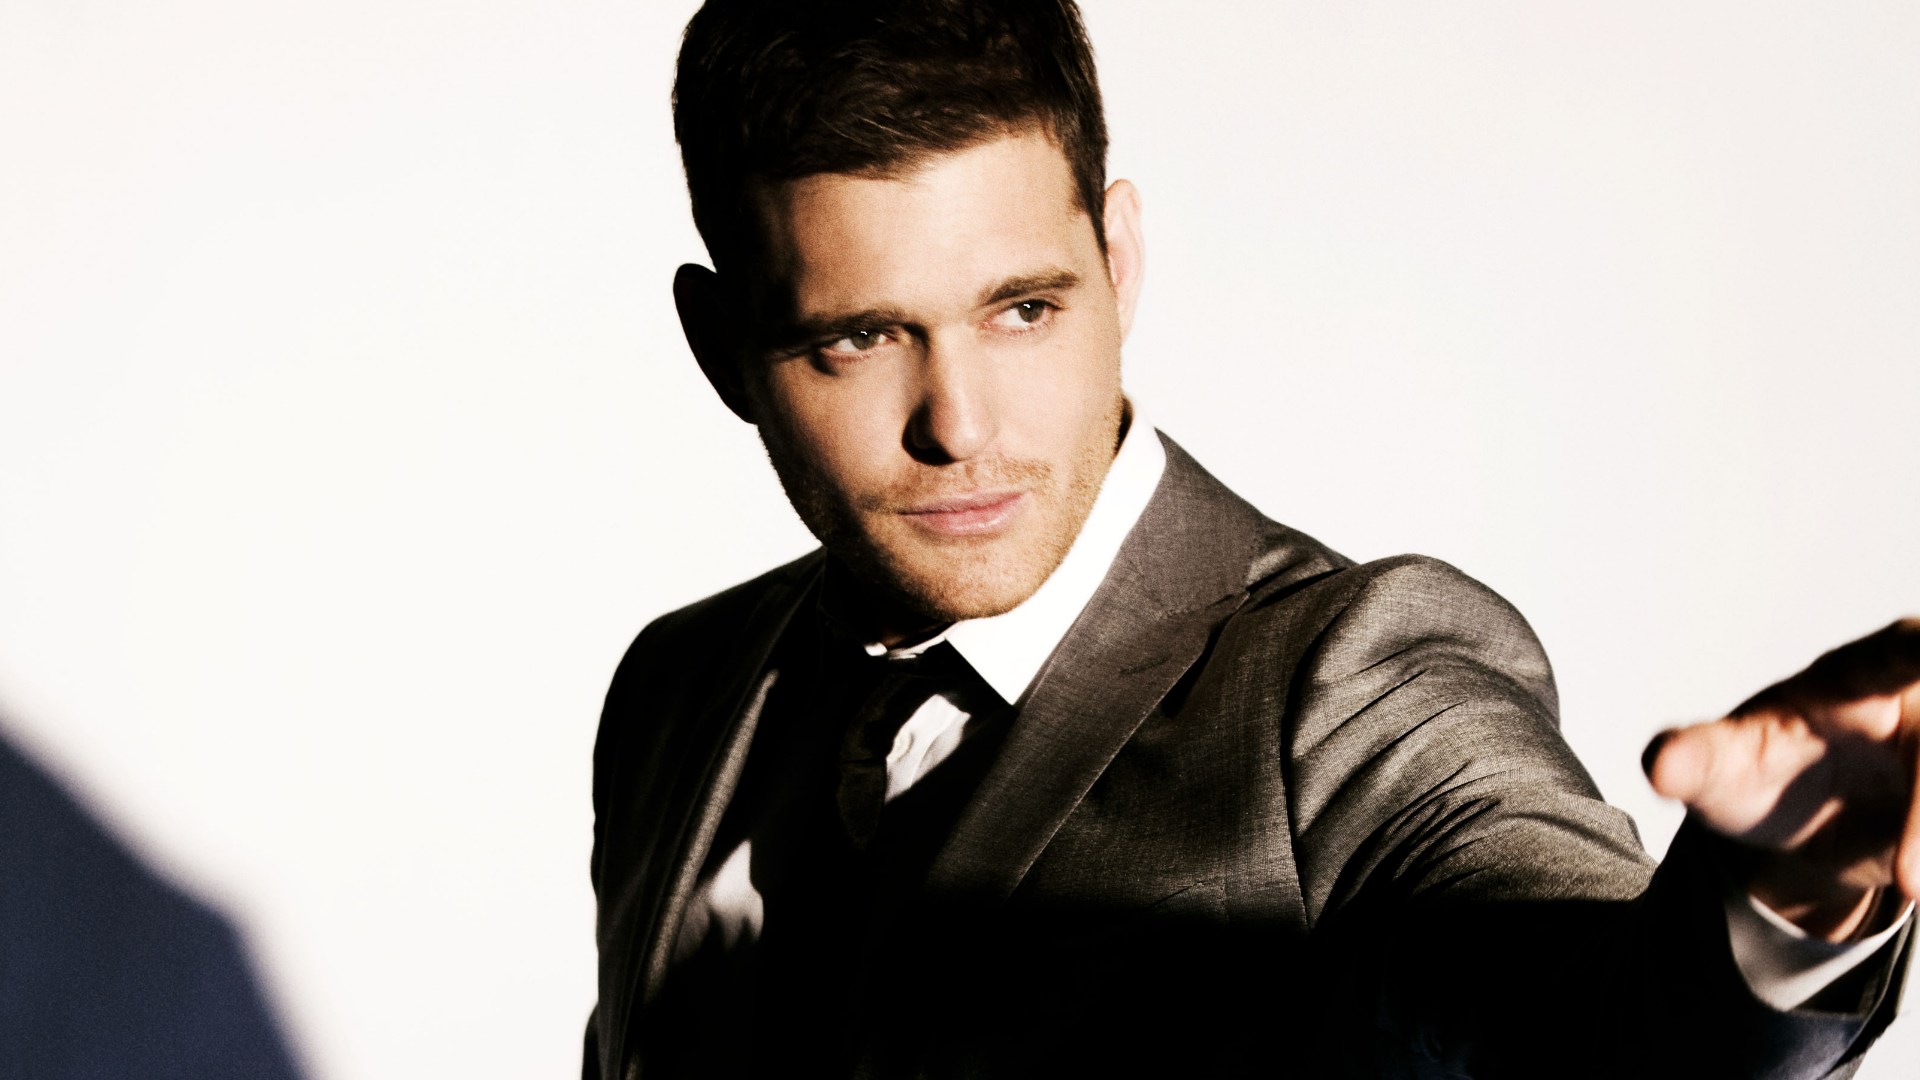 MICHAEL BUBLE HOLIDAY SONGS 1000